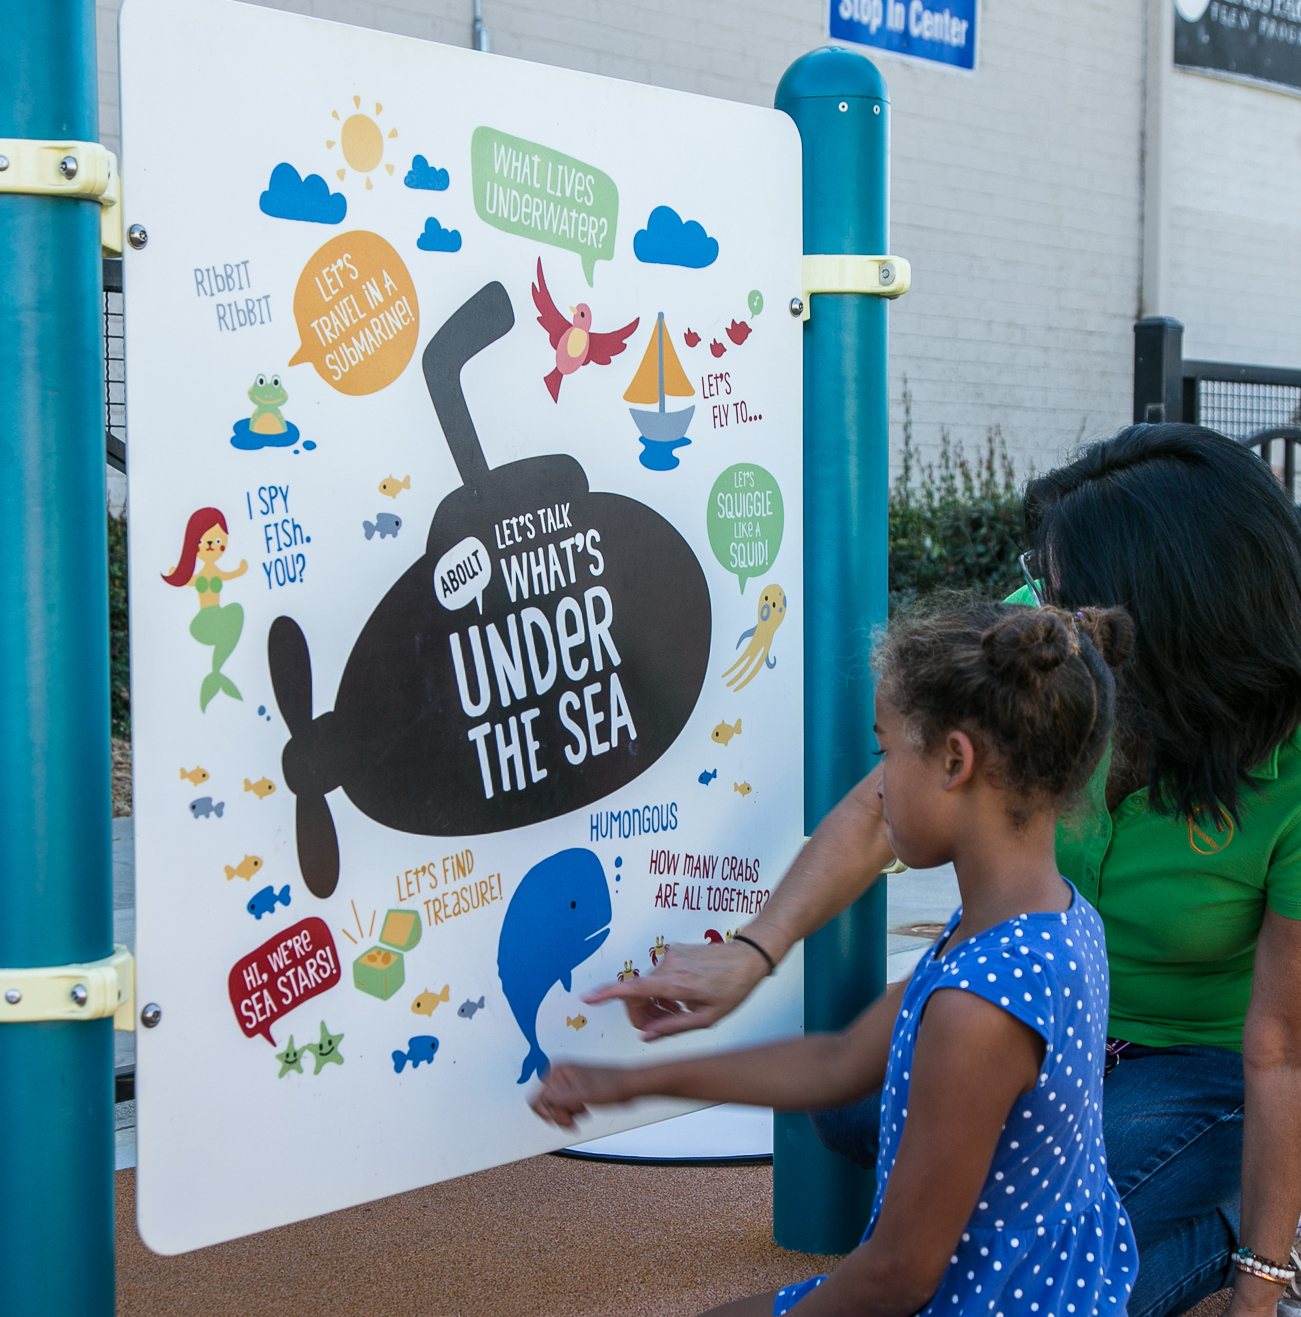 An adult and child stand outside in front of a panel with a variety of "under the sea" themed prompts for reading and talking